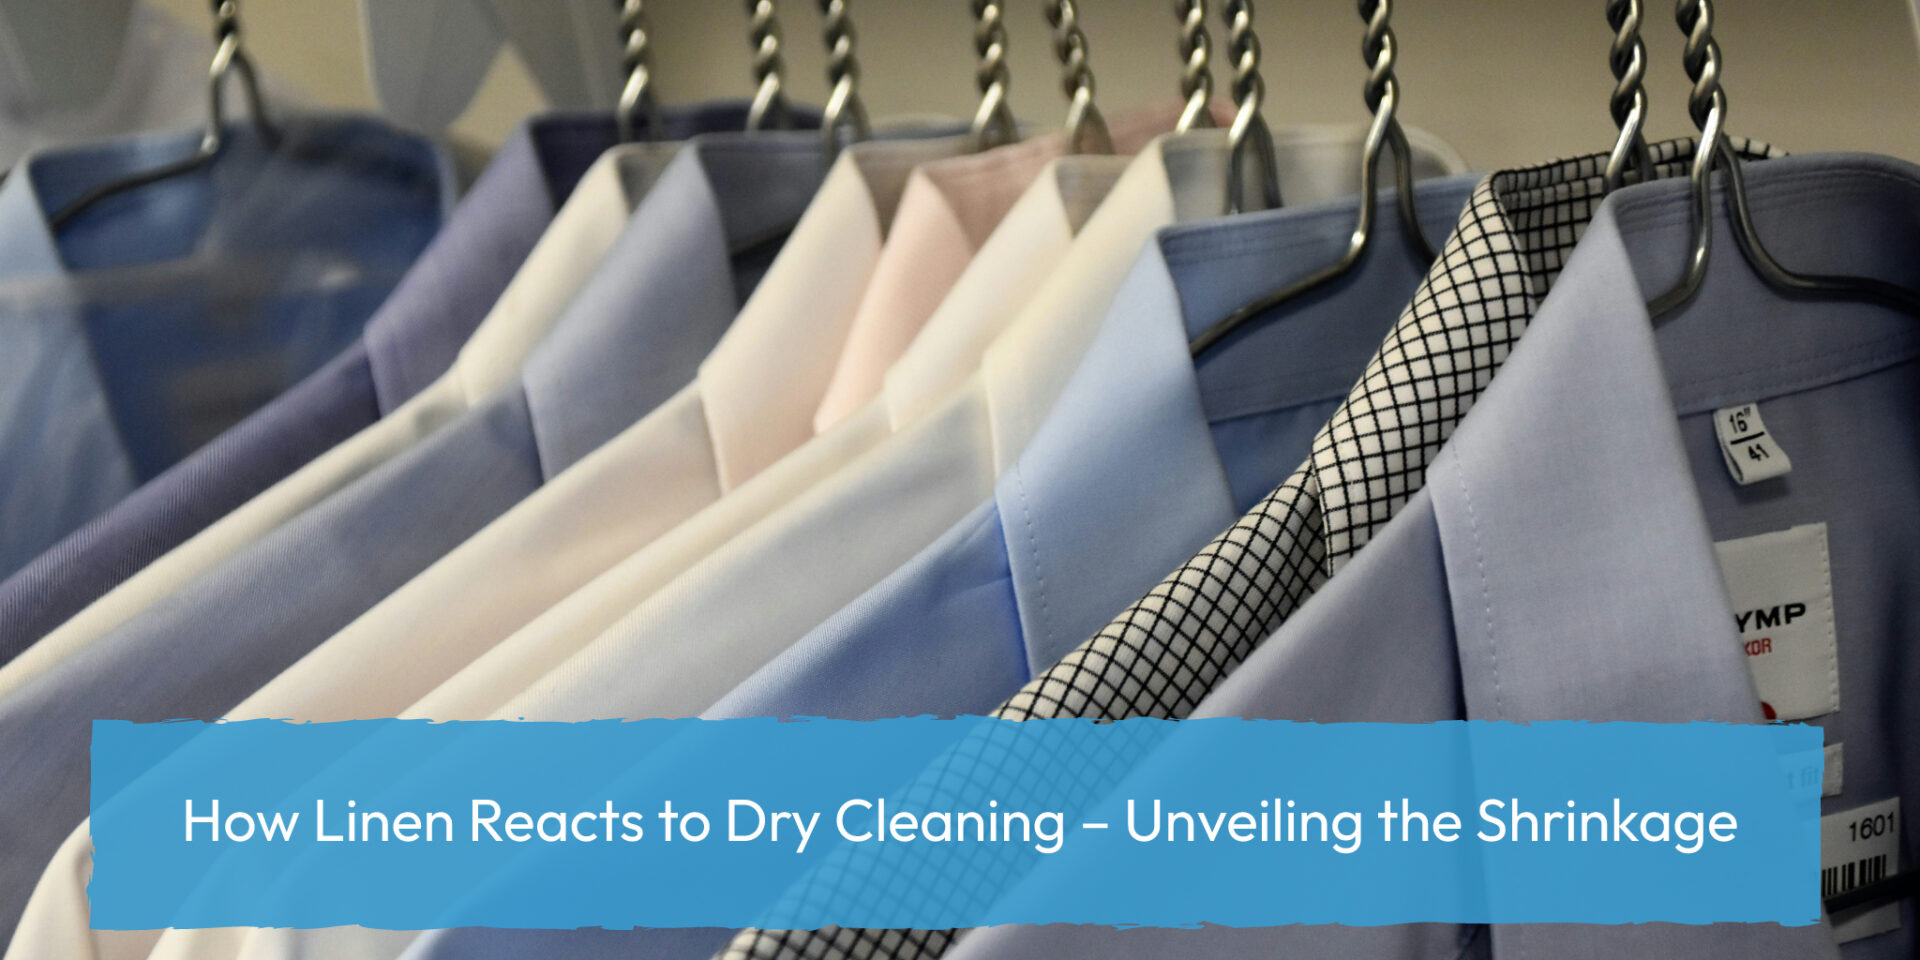 How Linen Reacts to Dry Cleaning – Unveiling the Shrinkage